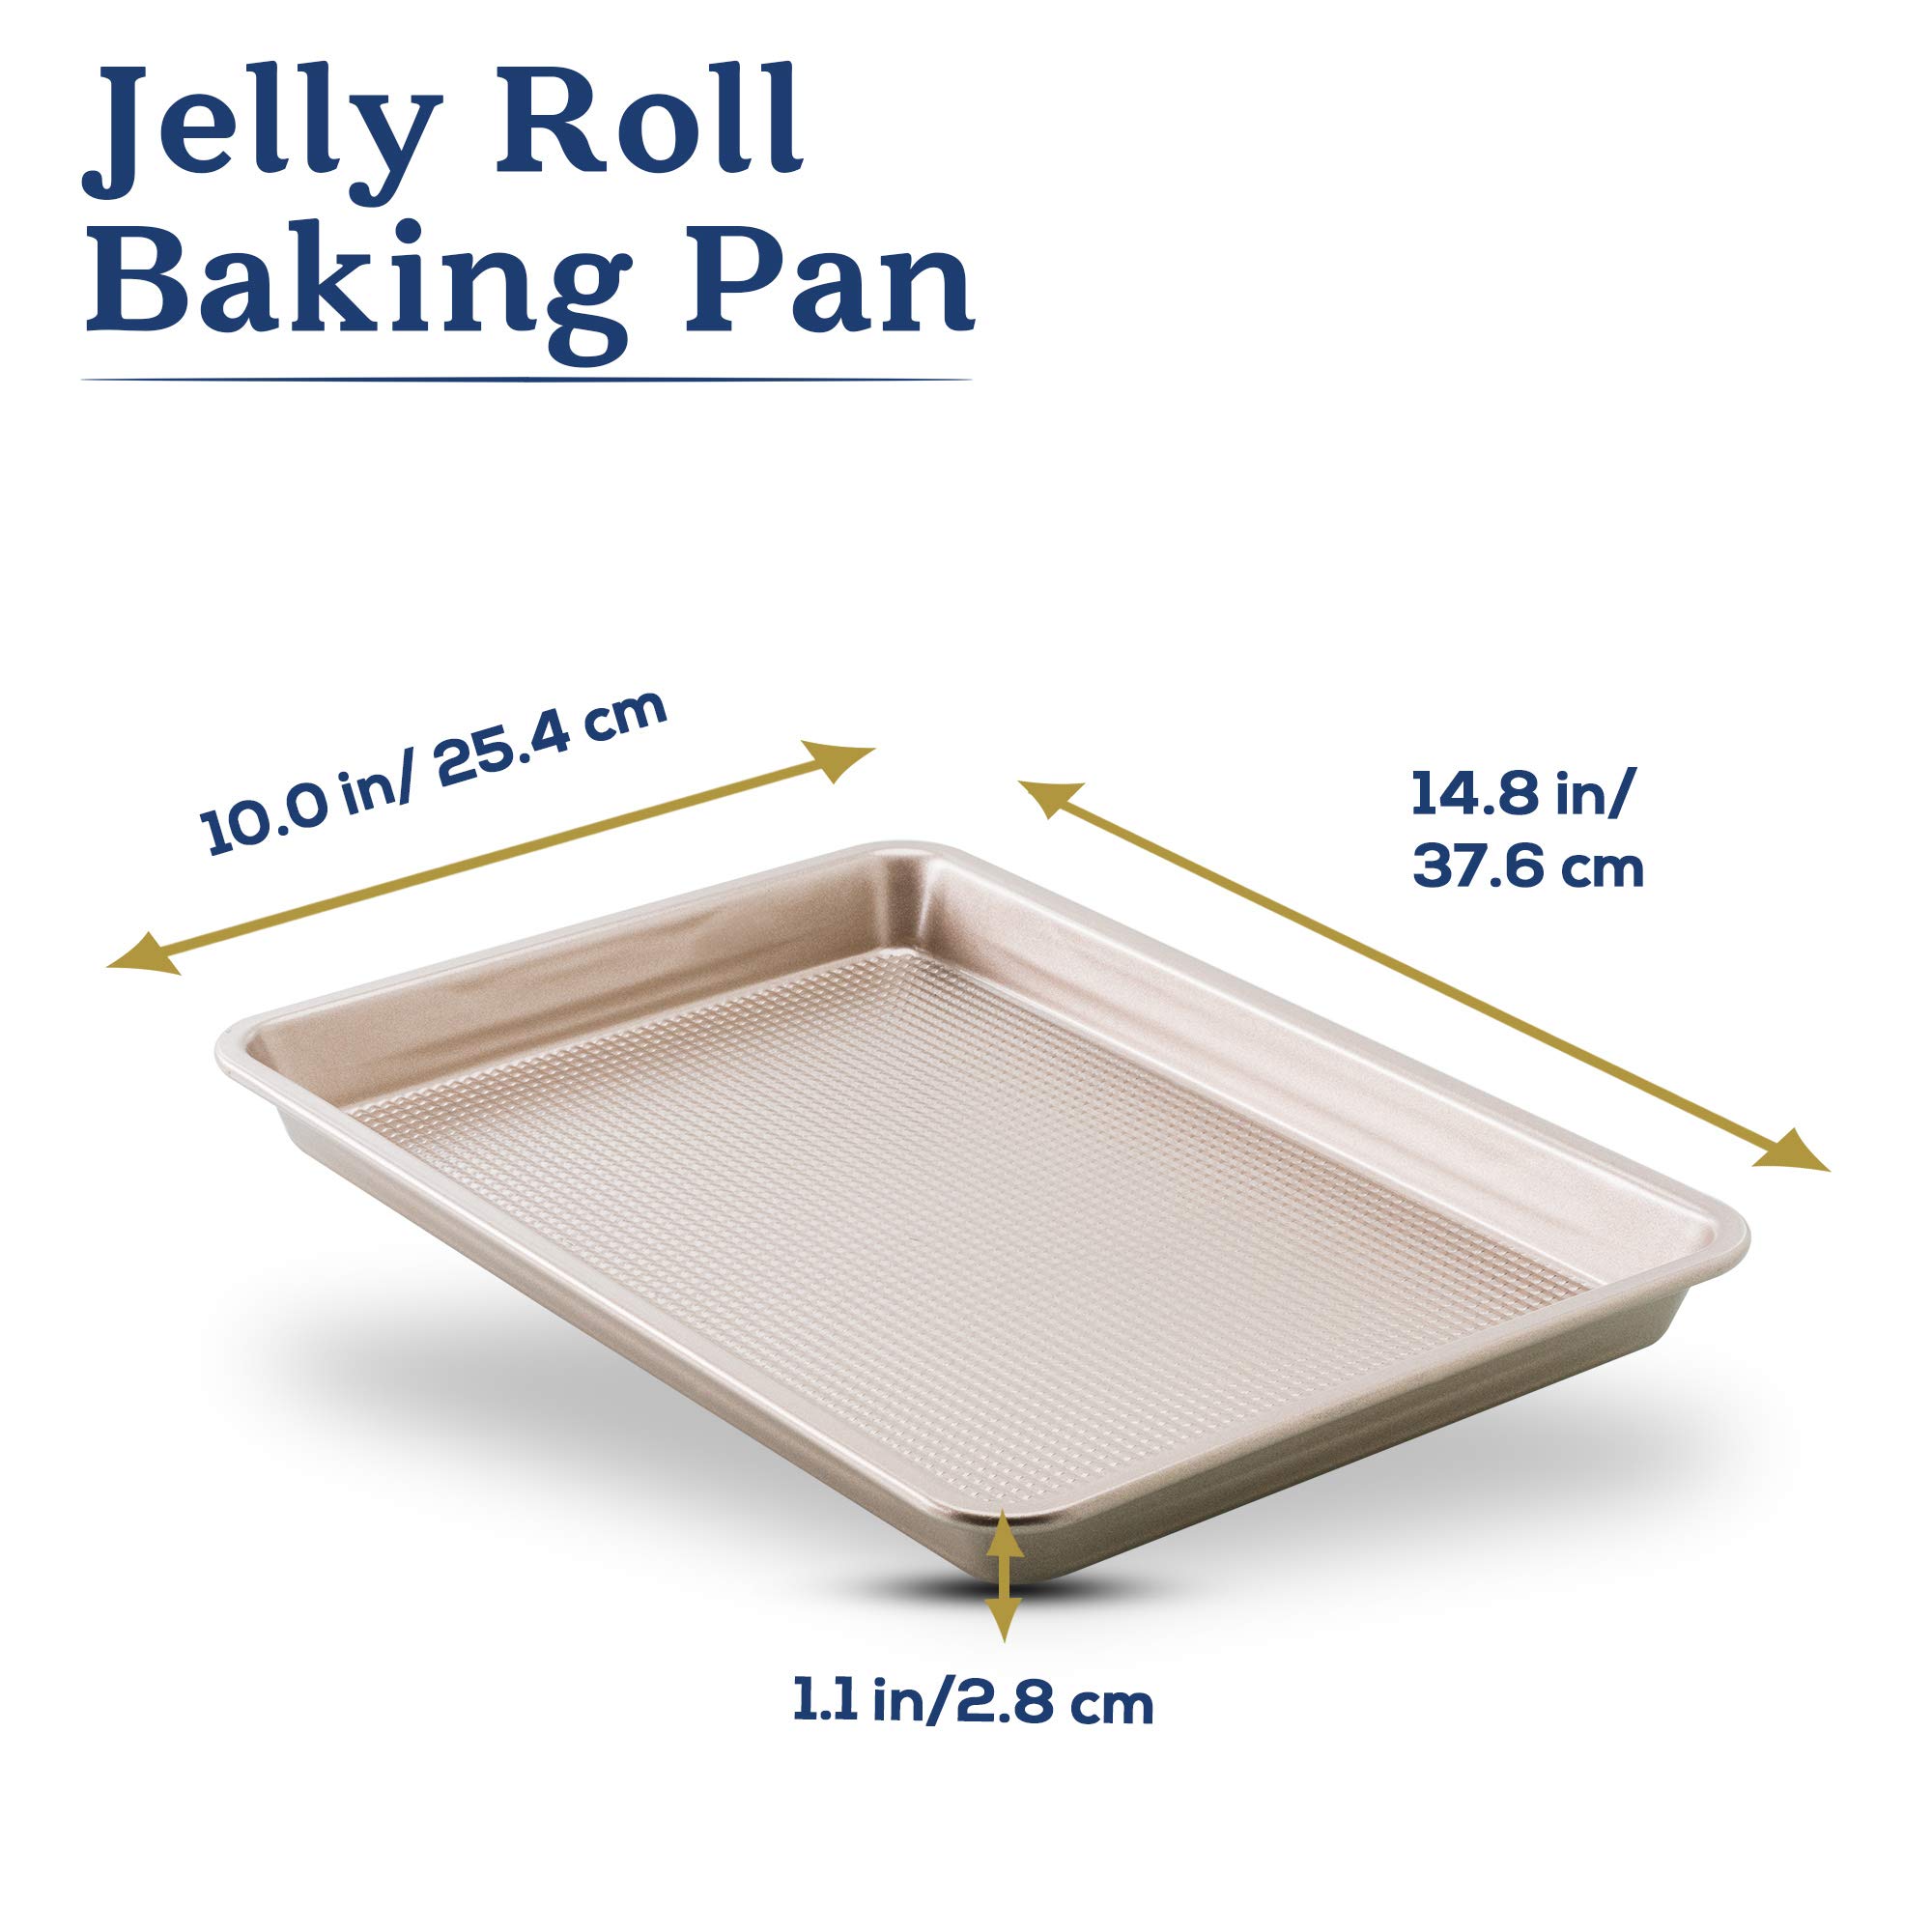 Nonstick Jelly Roll Baking Sheet Pan by Ultra Cuisine – Food-Safe, Warp & Scratch Resistant Texture for Airflow, & Carbon Steel Design Durable for Professional Quality Roasting, Size 10 x 15 inch